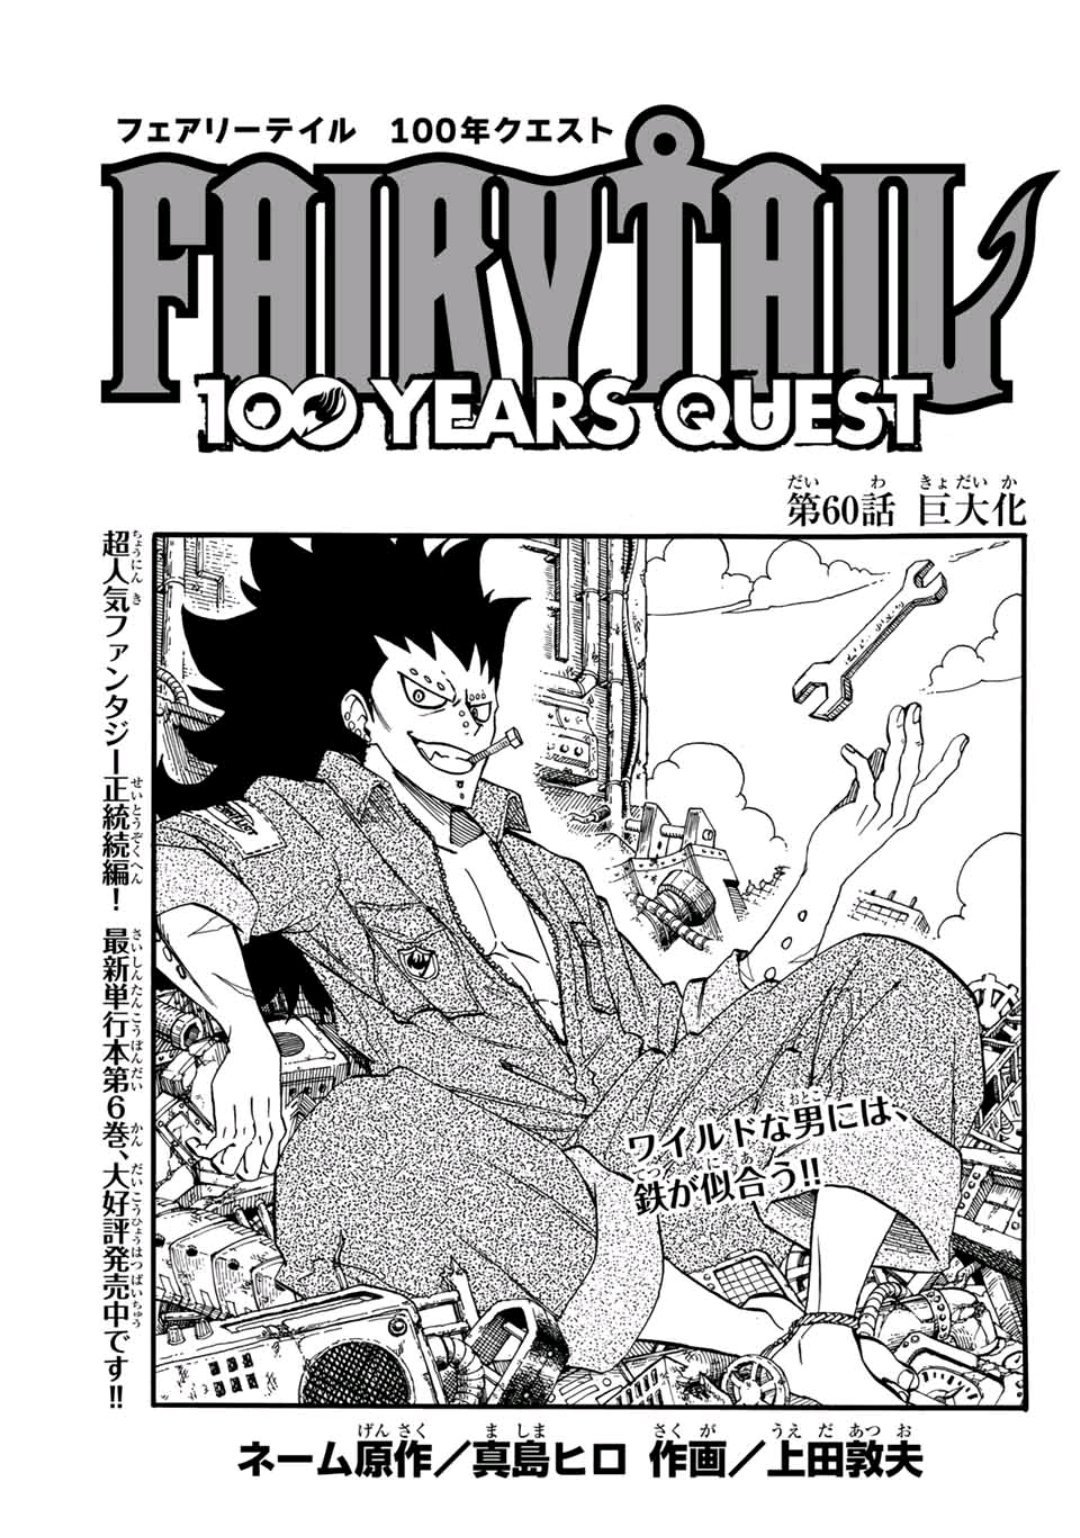 Image: Fairy Tail: 100 Years Quest Chapter 1, Fairy Tail Wiki, FANDOM